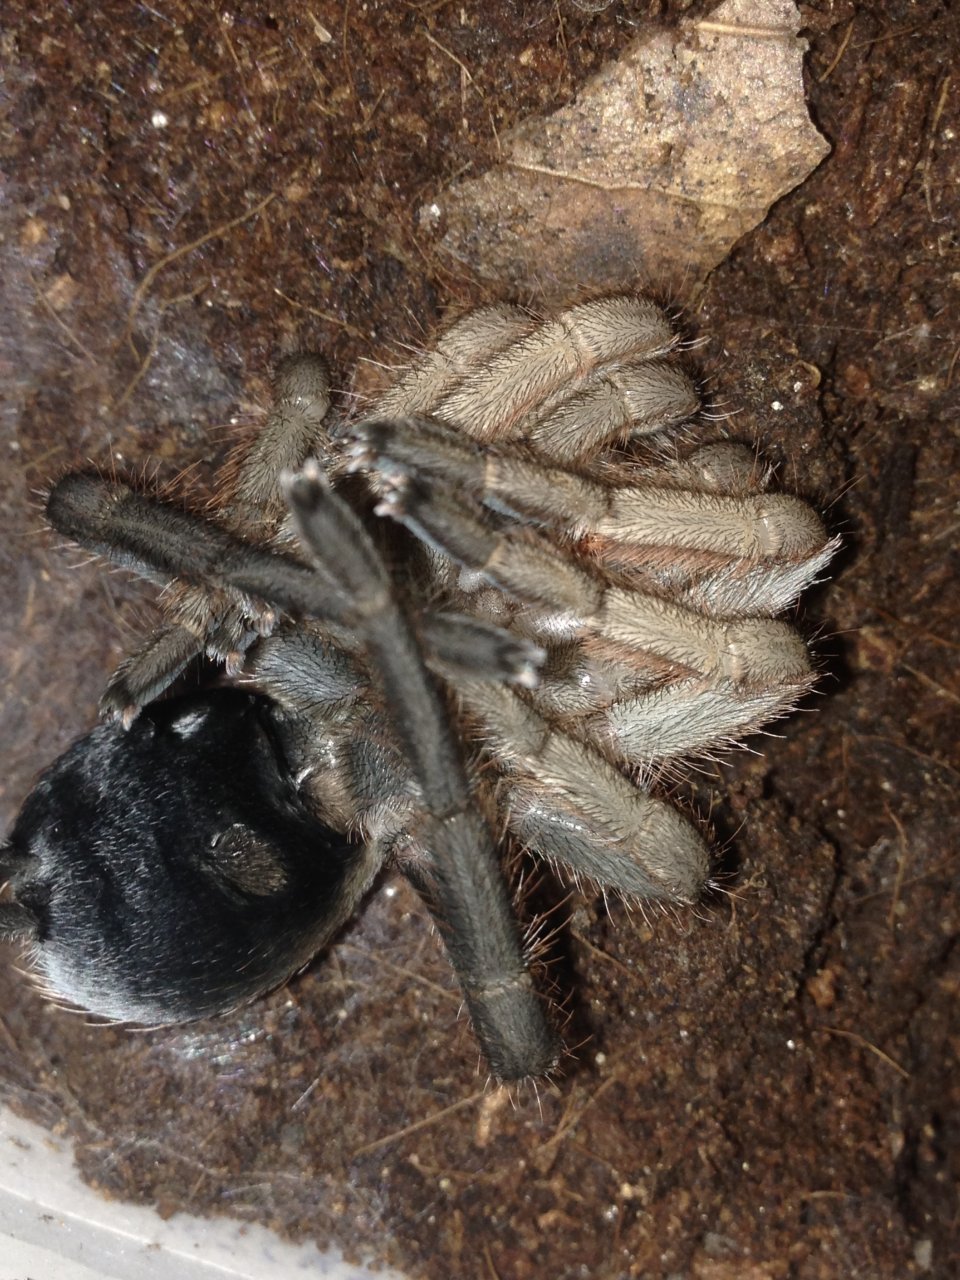 0.1 Crassicrus sp. "Guerrero" Freshly Molted (Most Underrated Species)